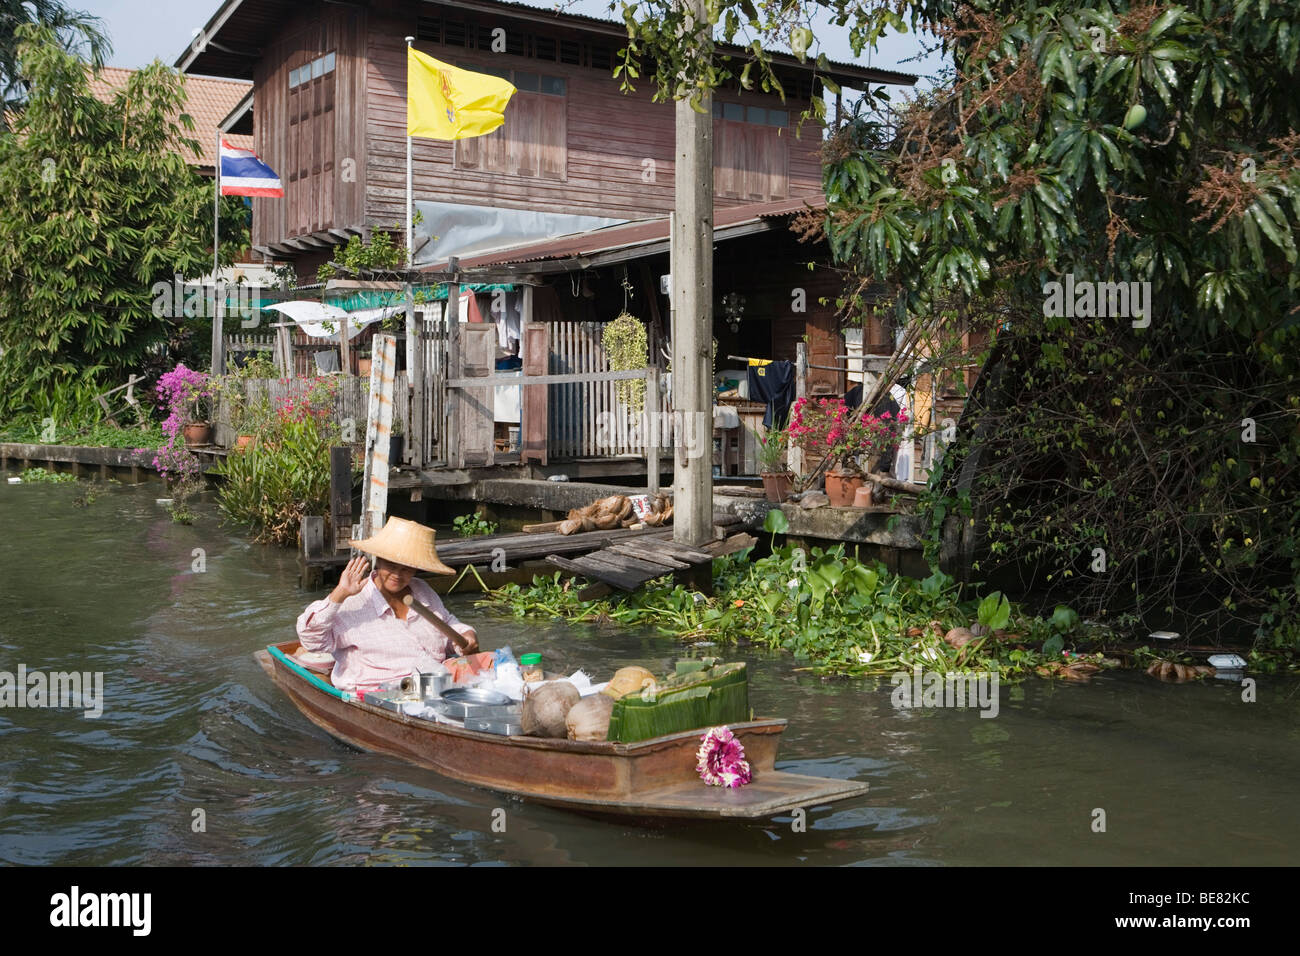 Woman in a longtail boat on way to the Floating Market, Bangkok, Thailand Stock Photo